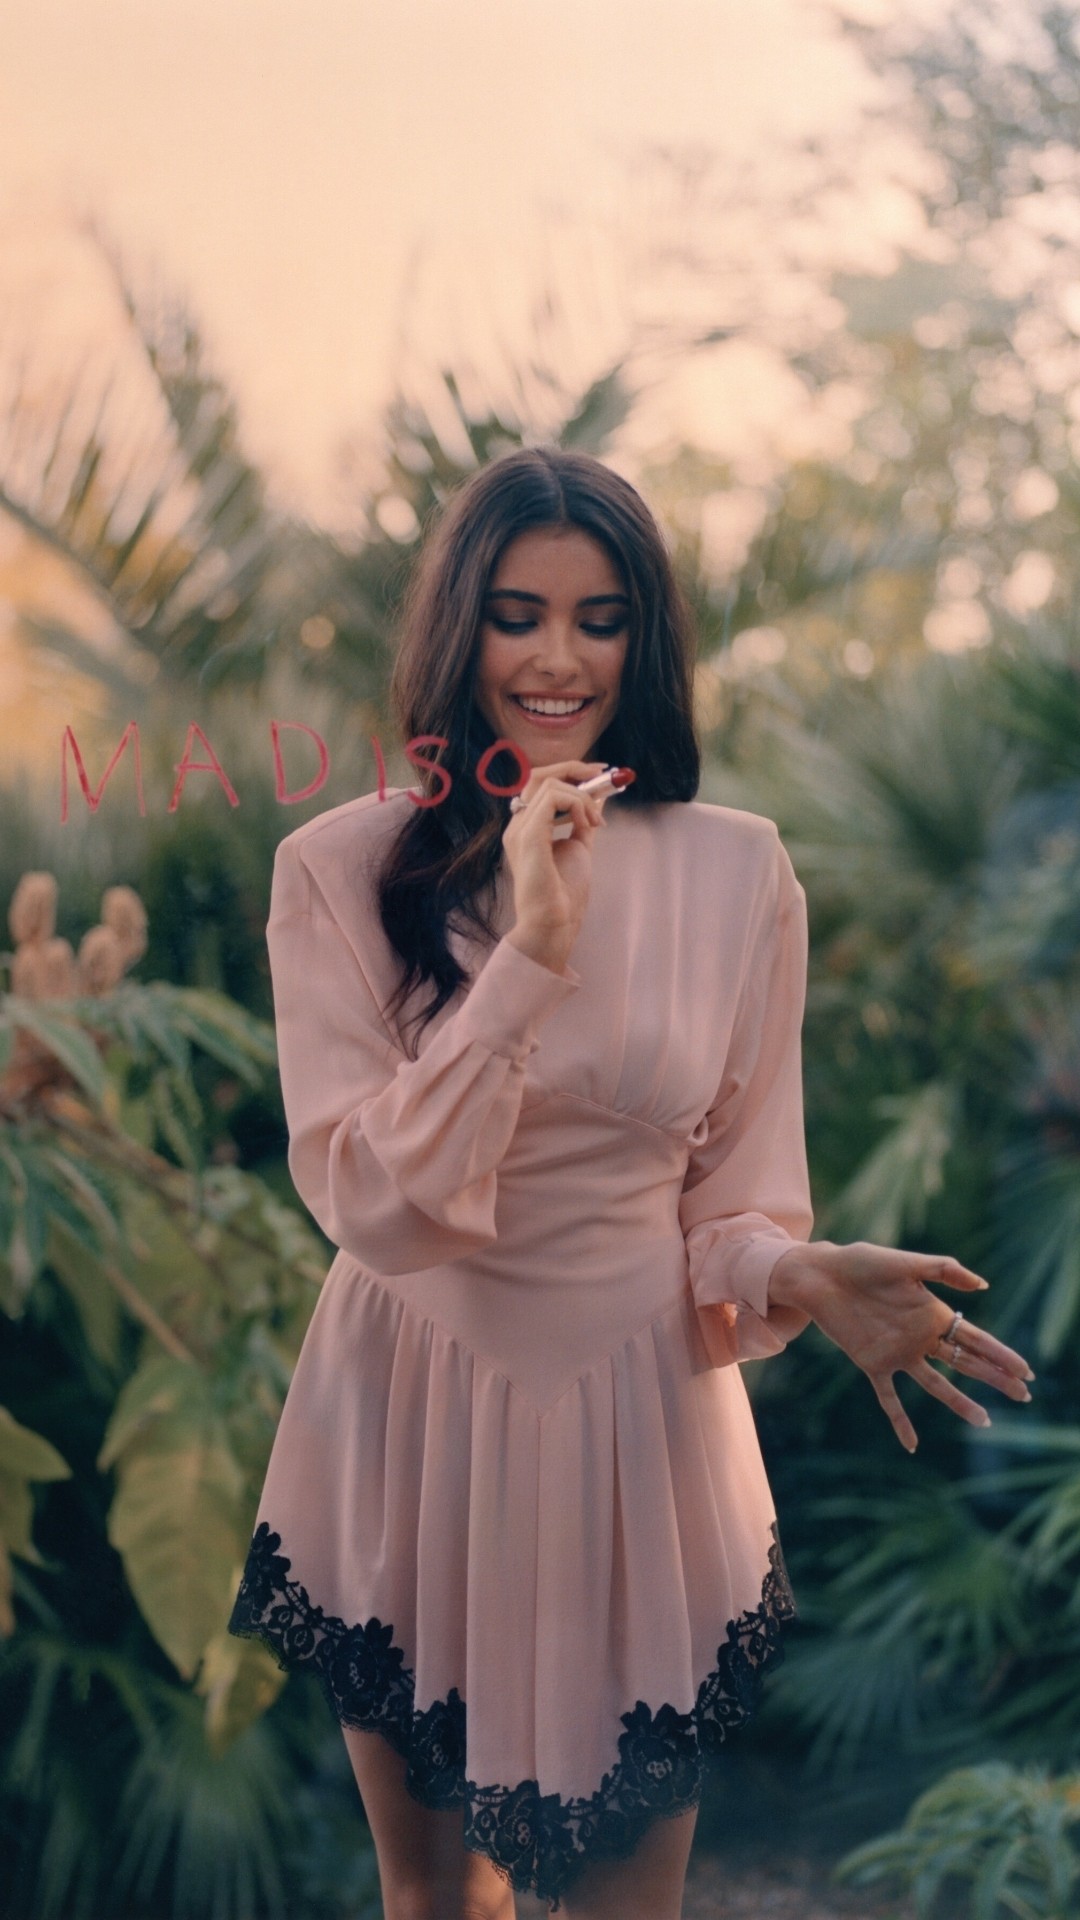 Madison Beer 2021 Wallpapers